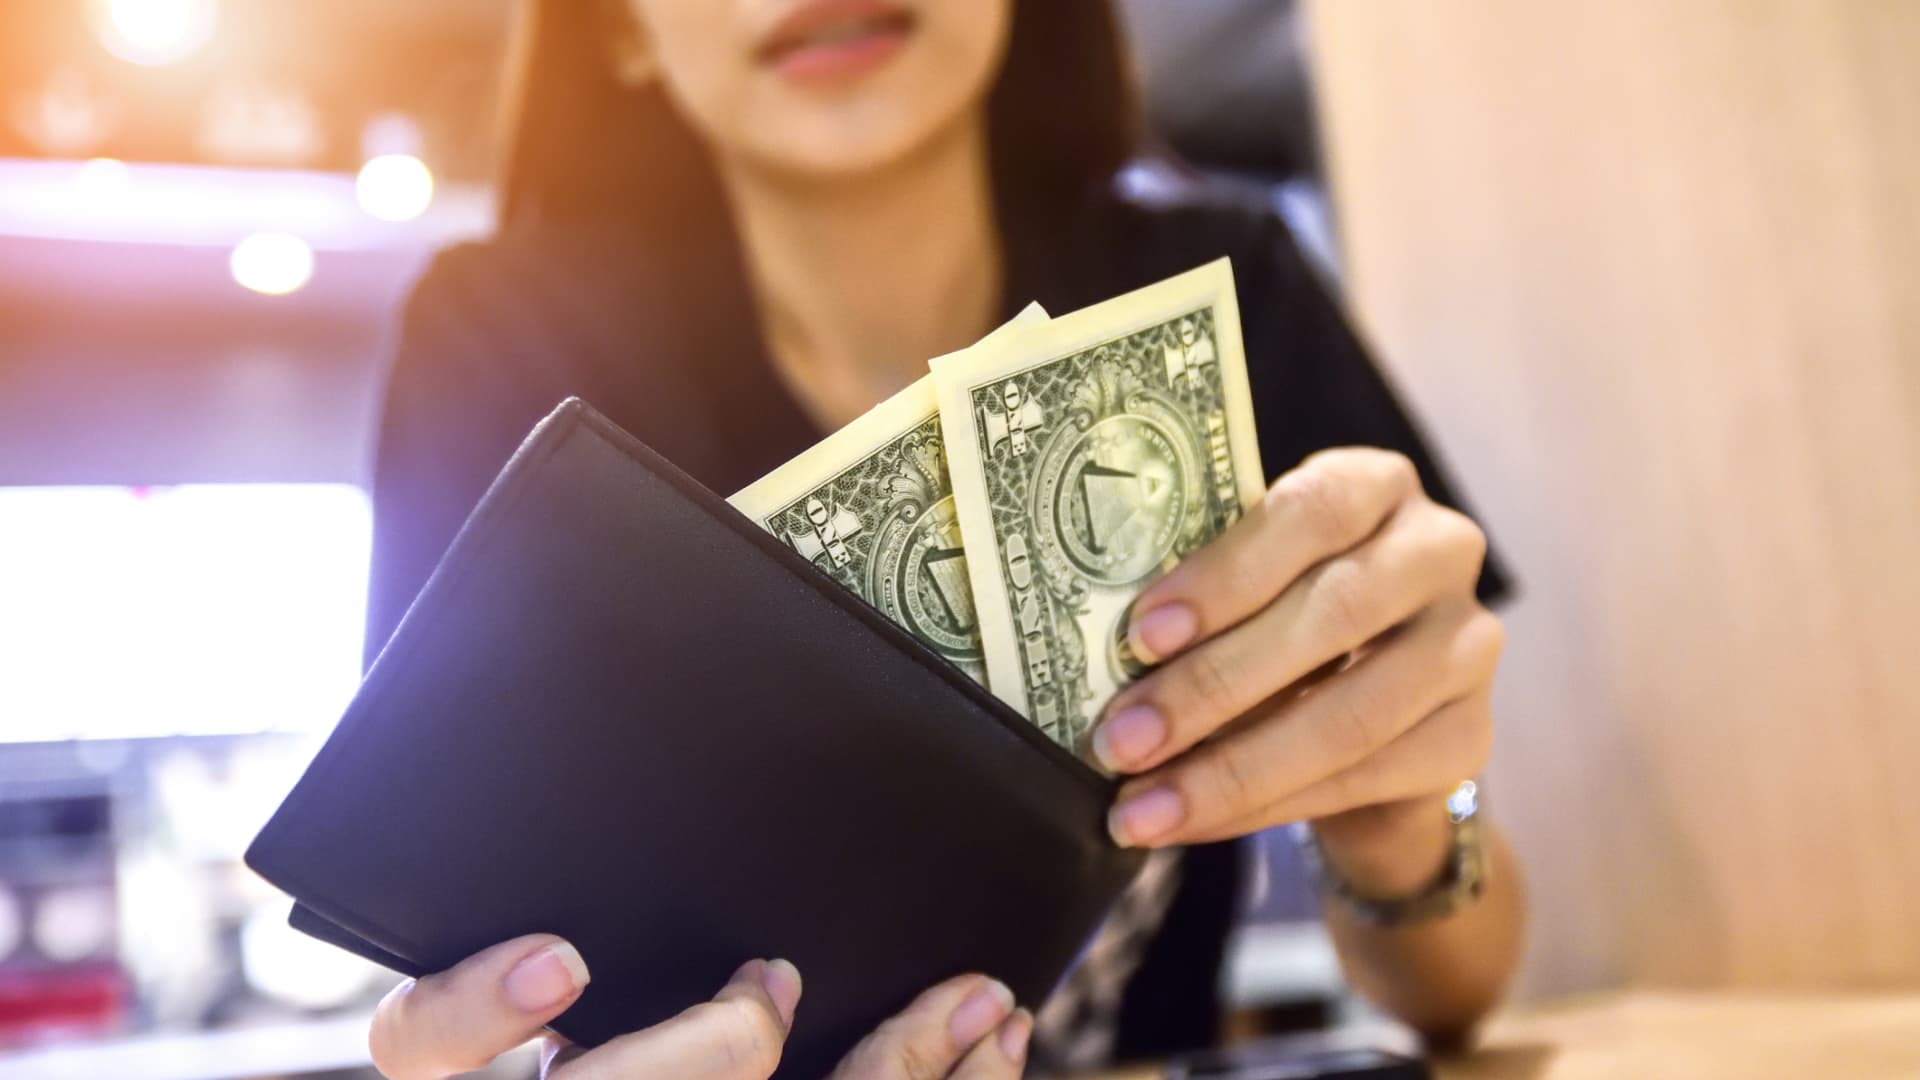 Most women see money as a tool to effect change, survey shows